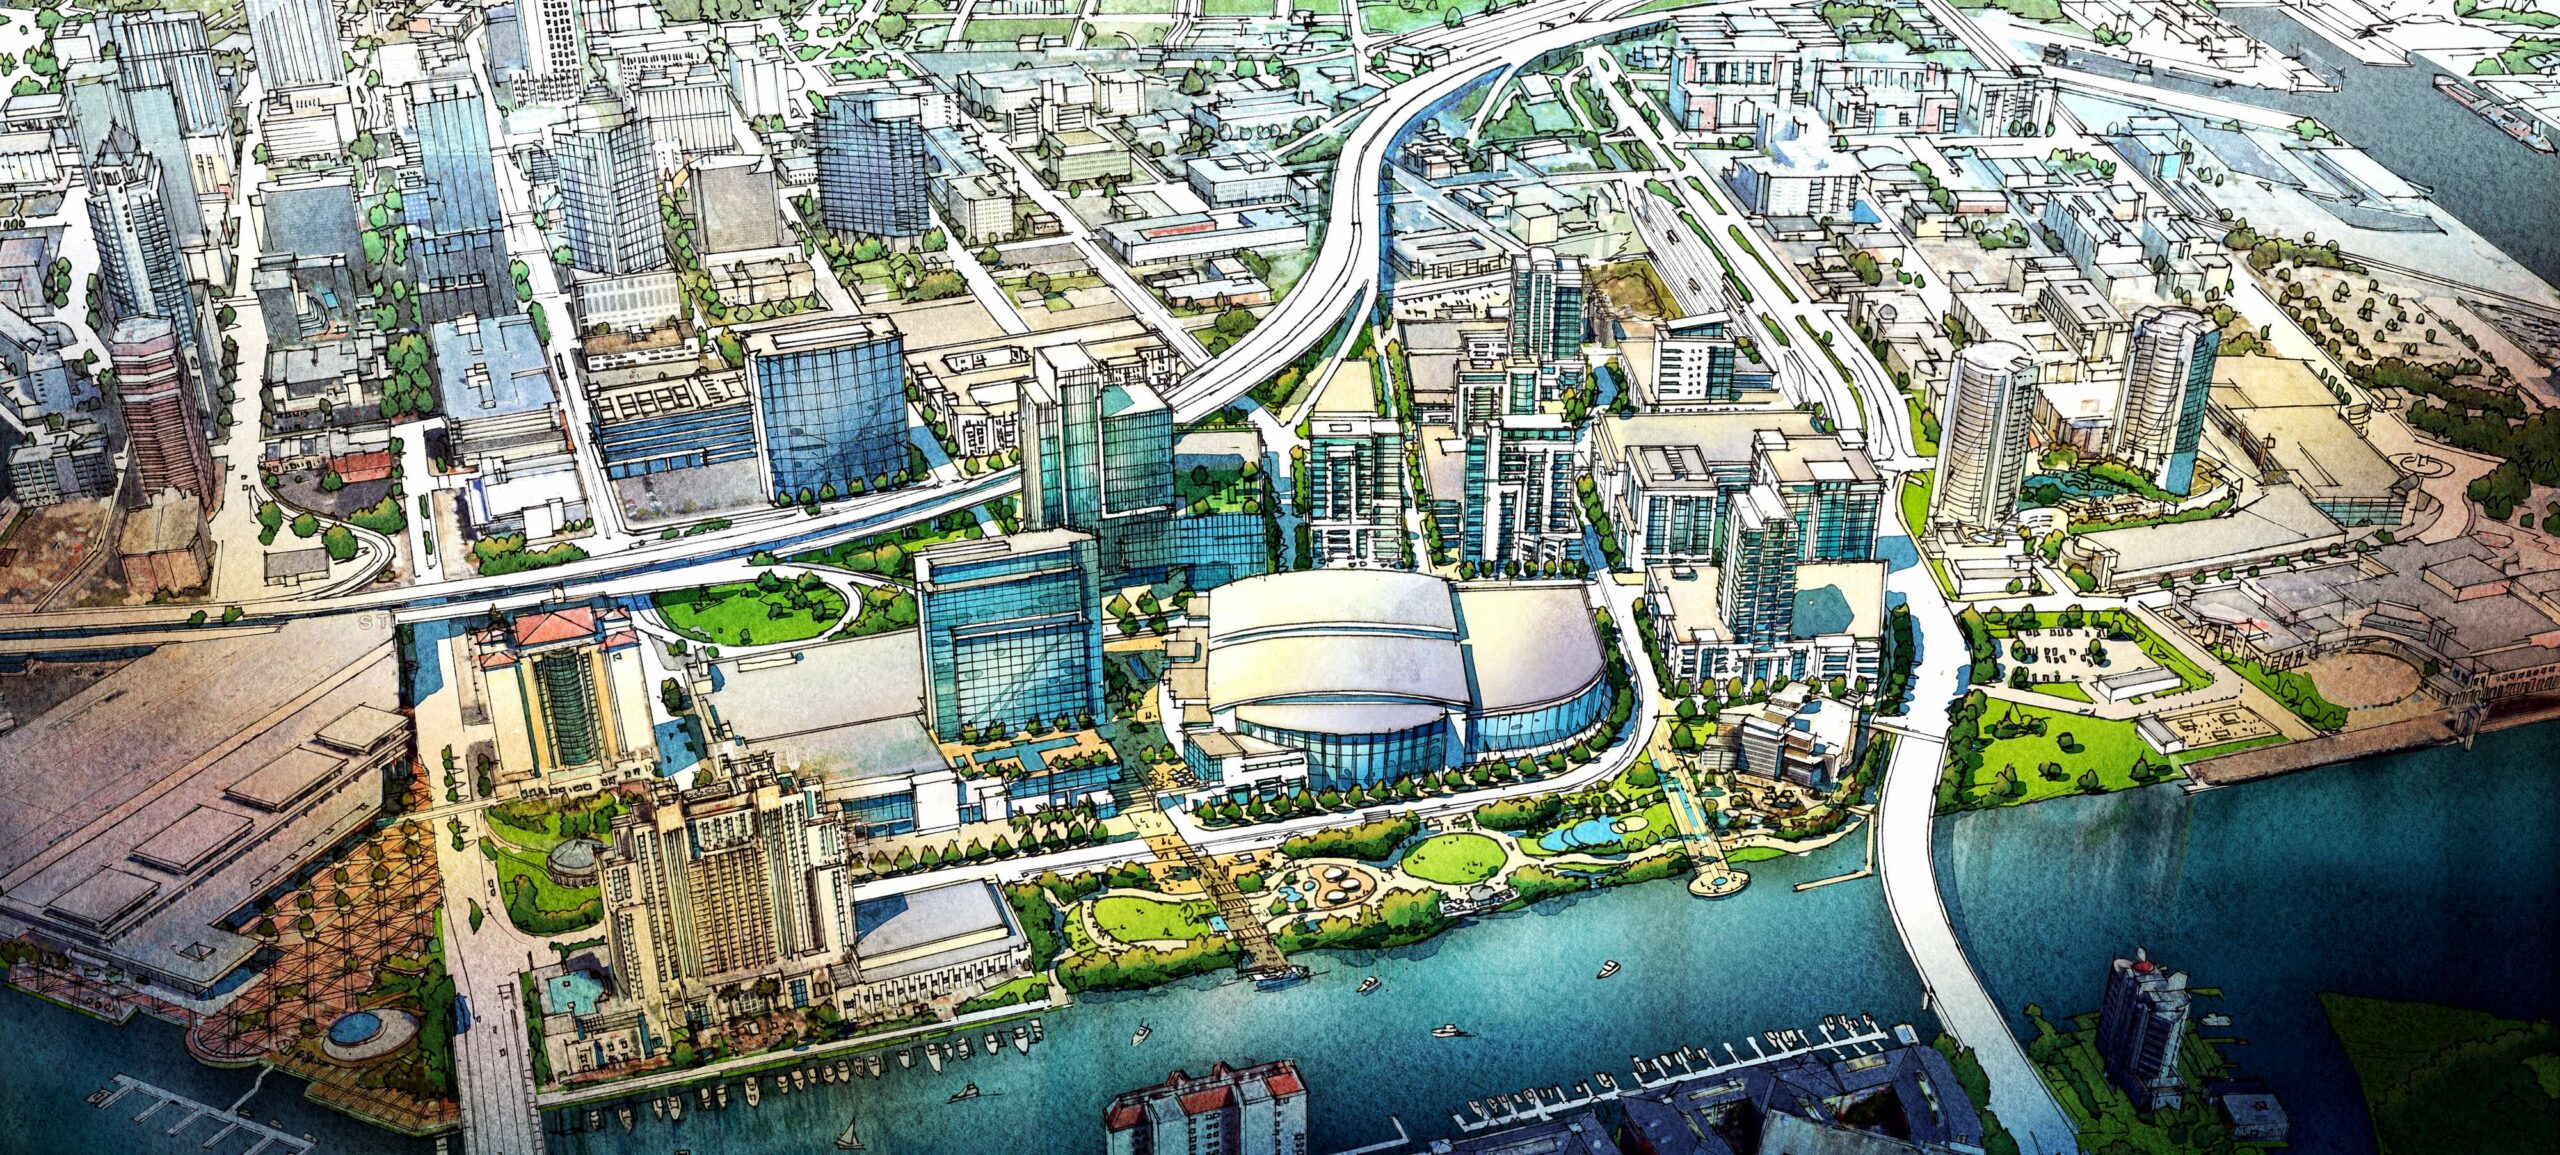 Water Street Tampa Developers Buy ConAgra Flour Mill for Future Expansion of $3 Billion Project